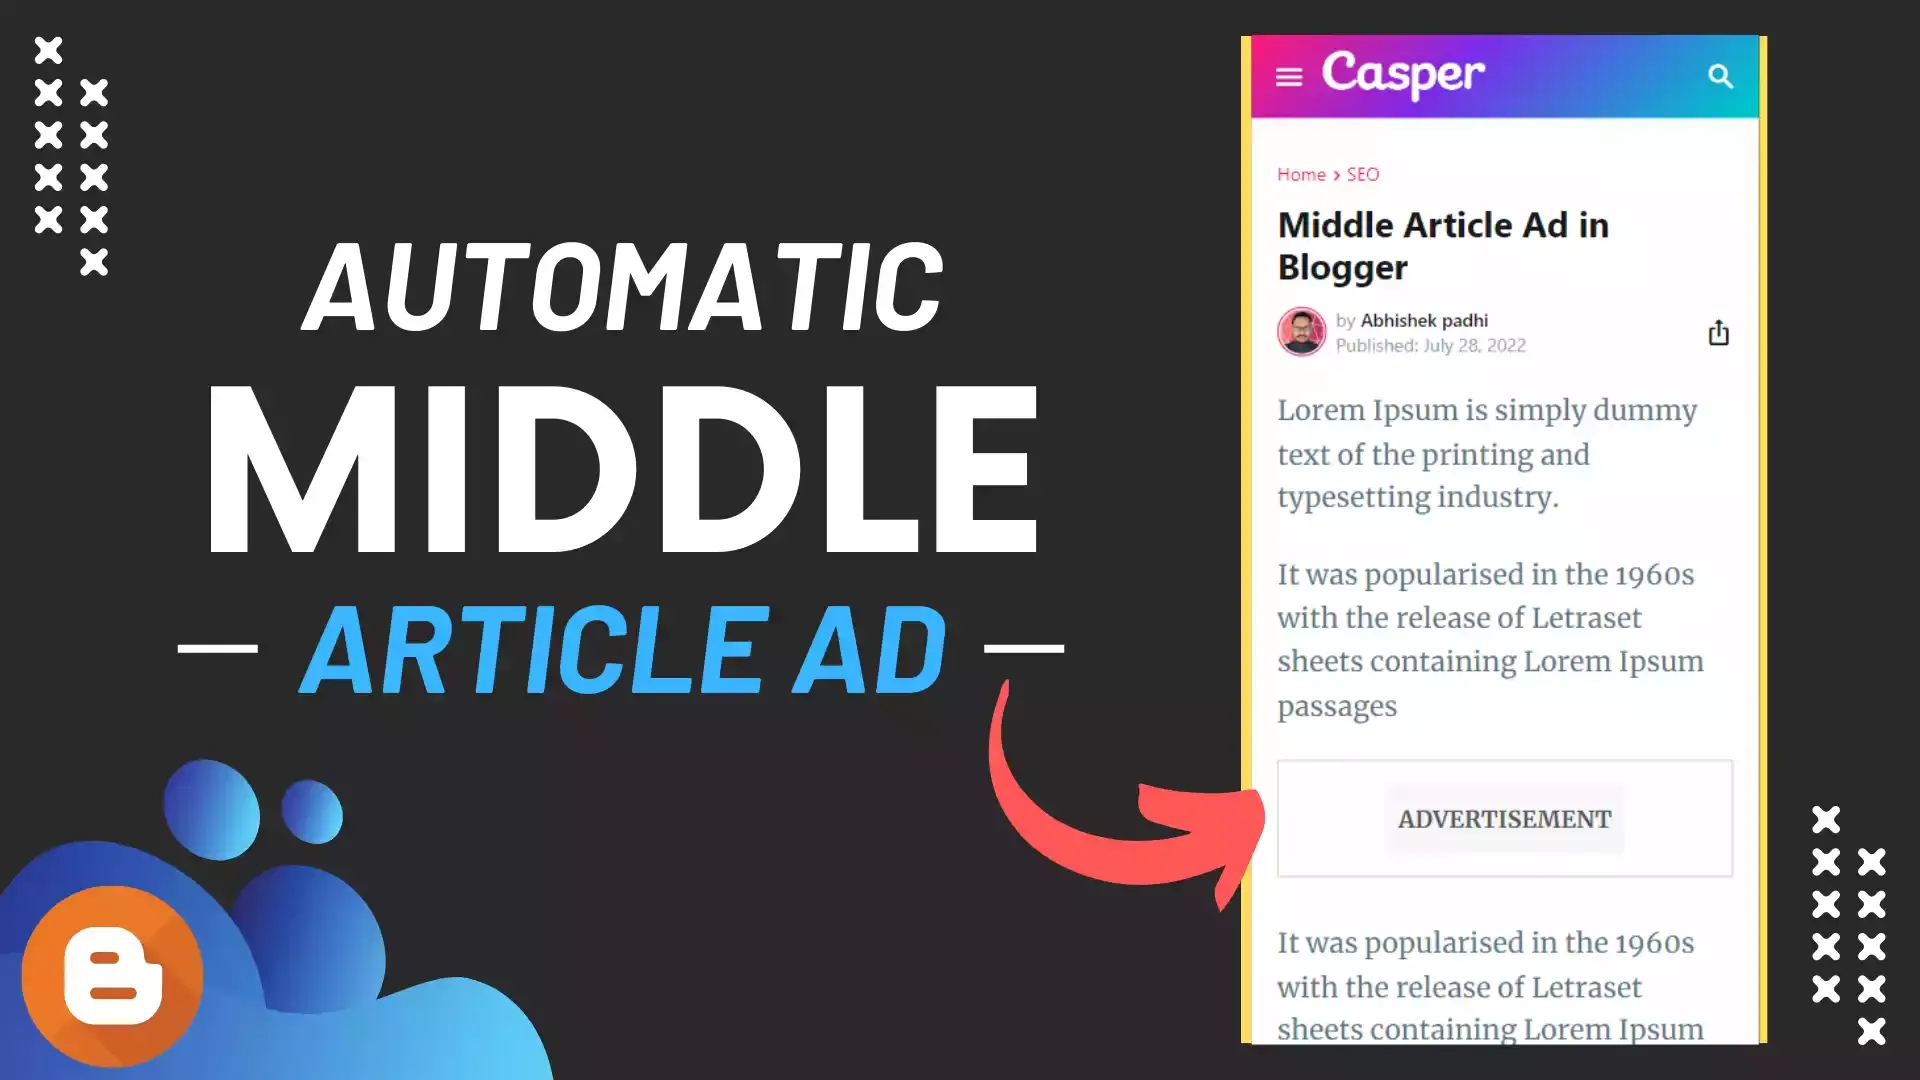 How to Add Middle Article Ads in Blogger Automatically